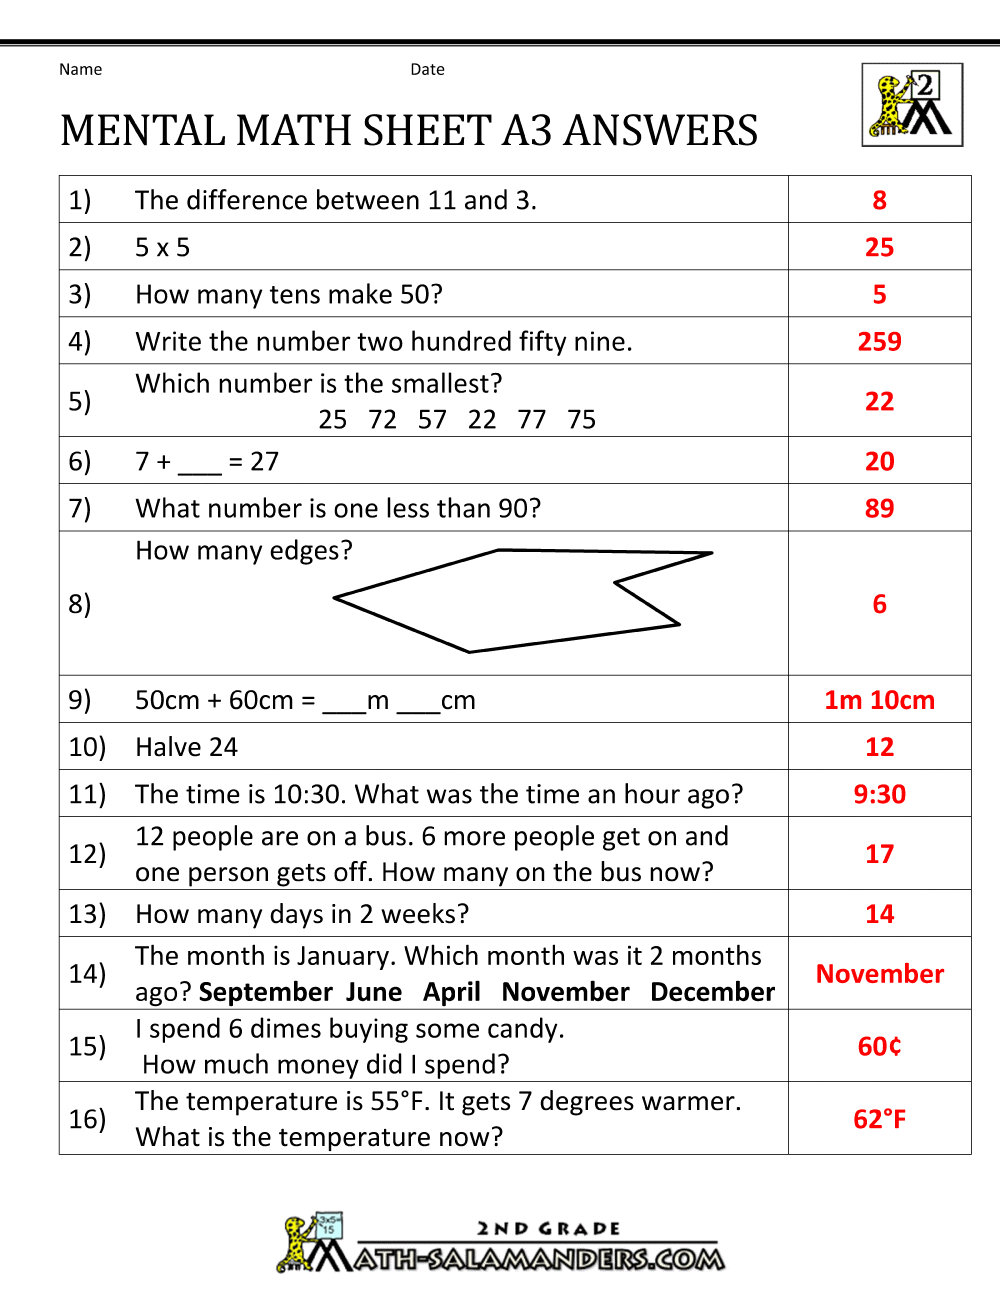 math-questions-for-grade-7-with-answers